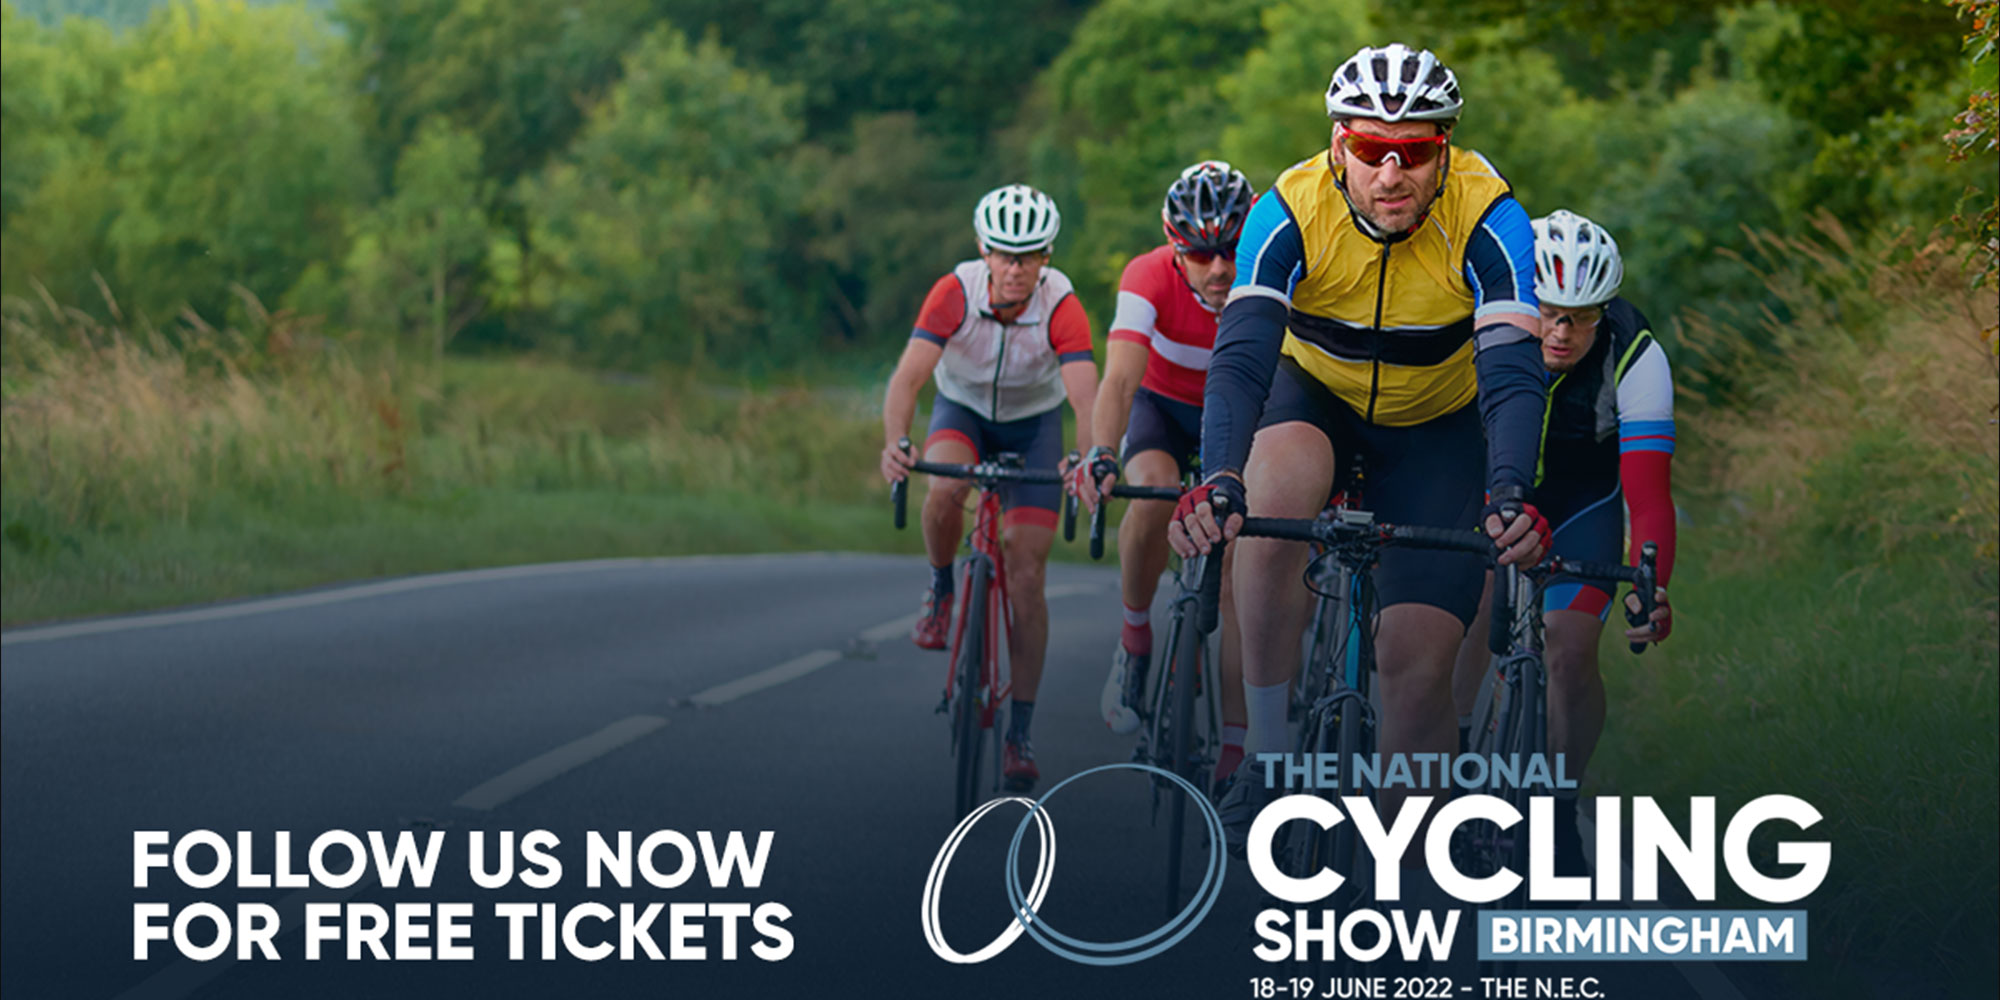 The National Cycling Show